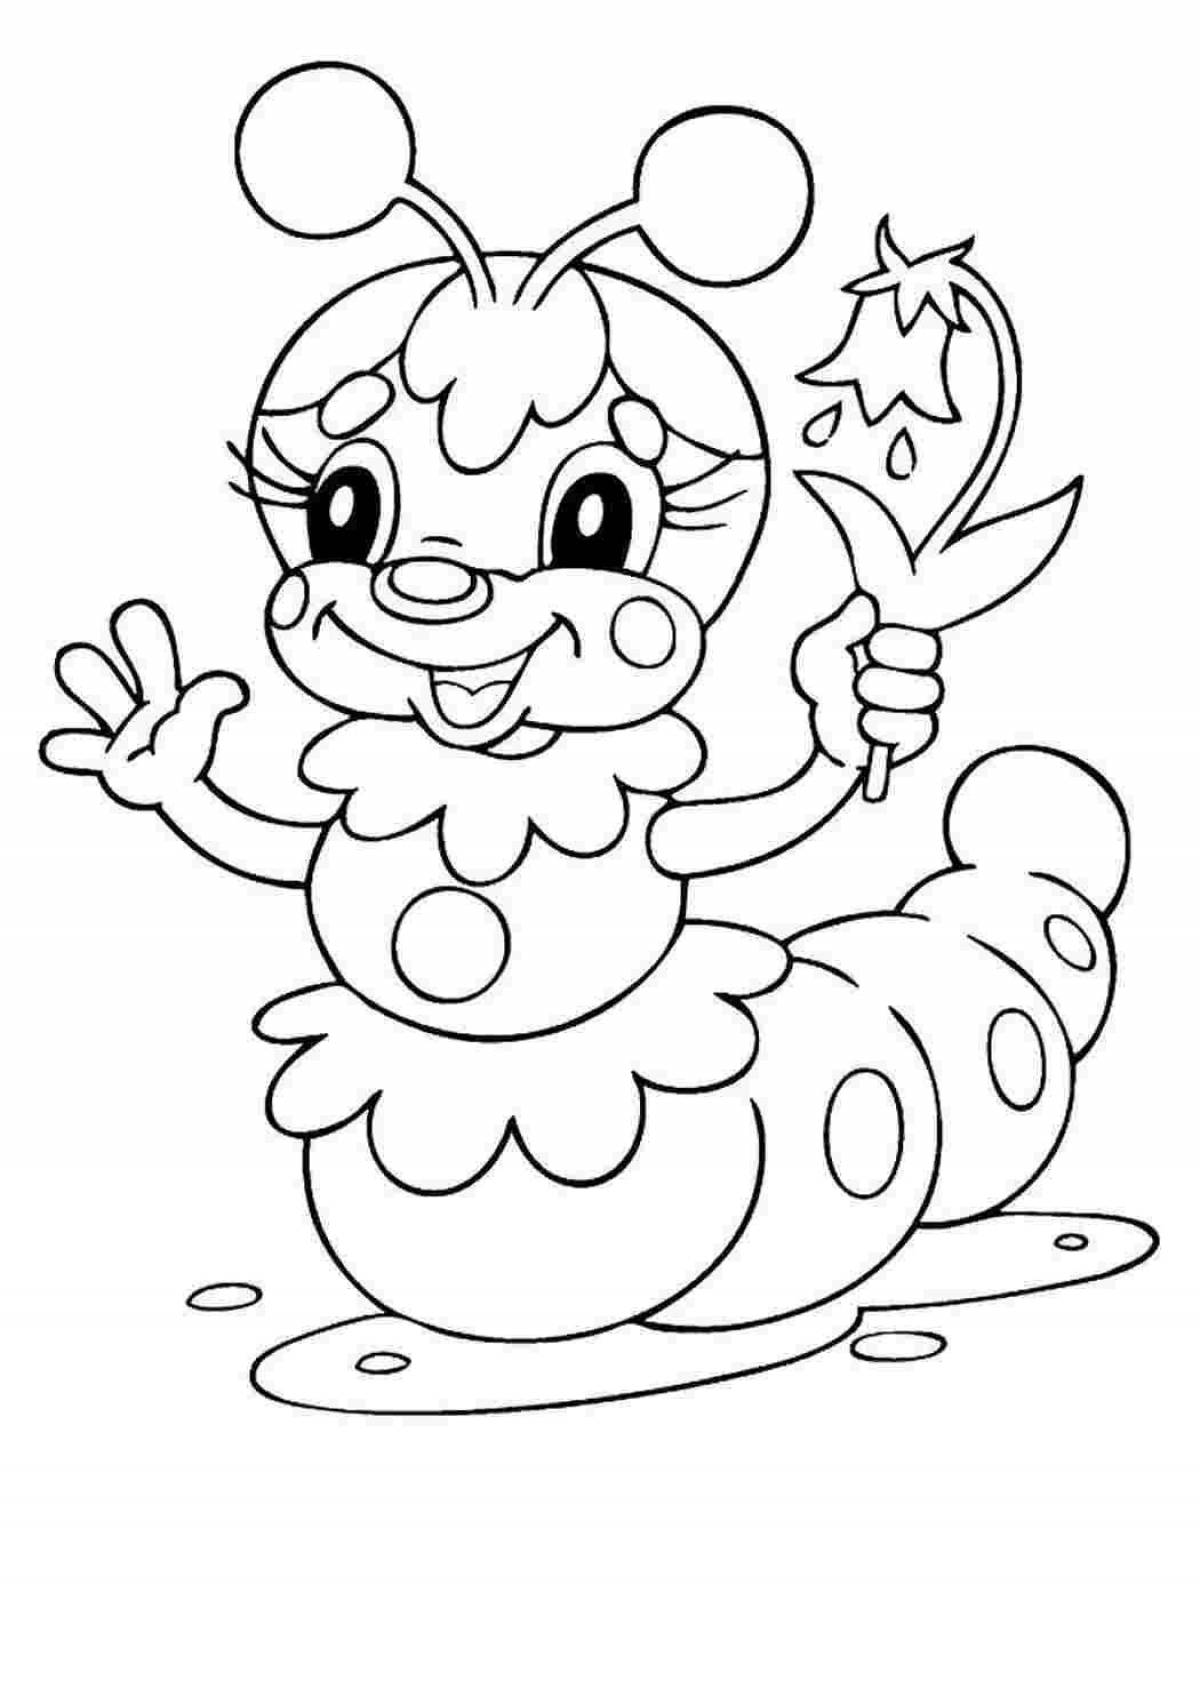 Fine animal coloring pages for kids